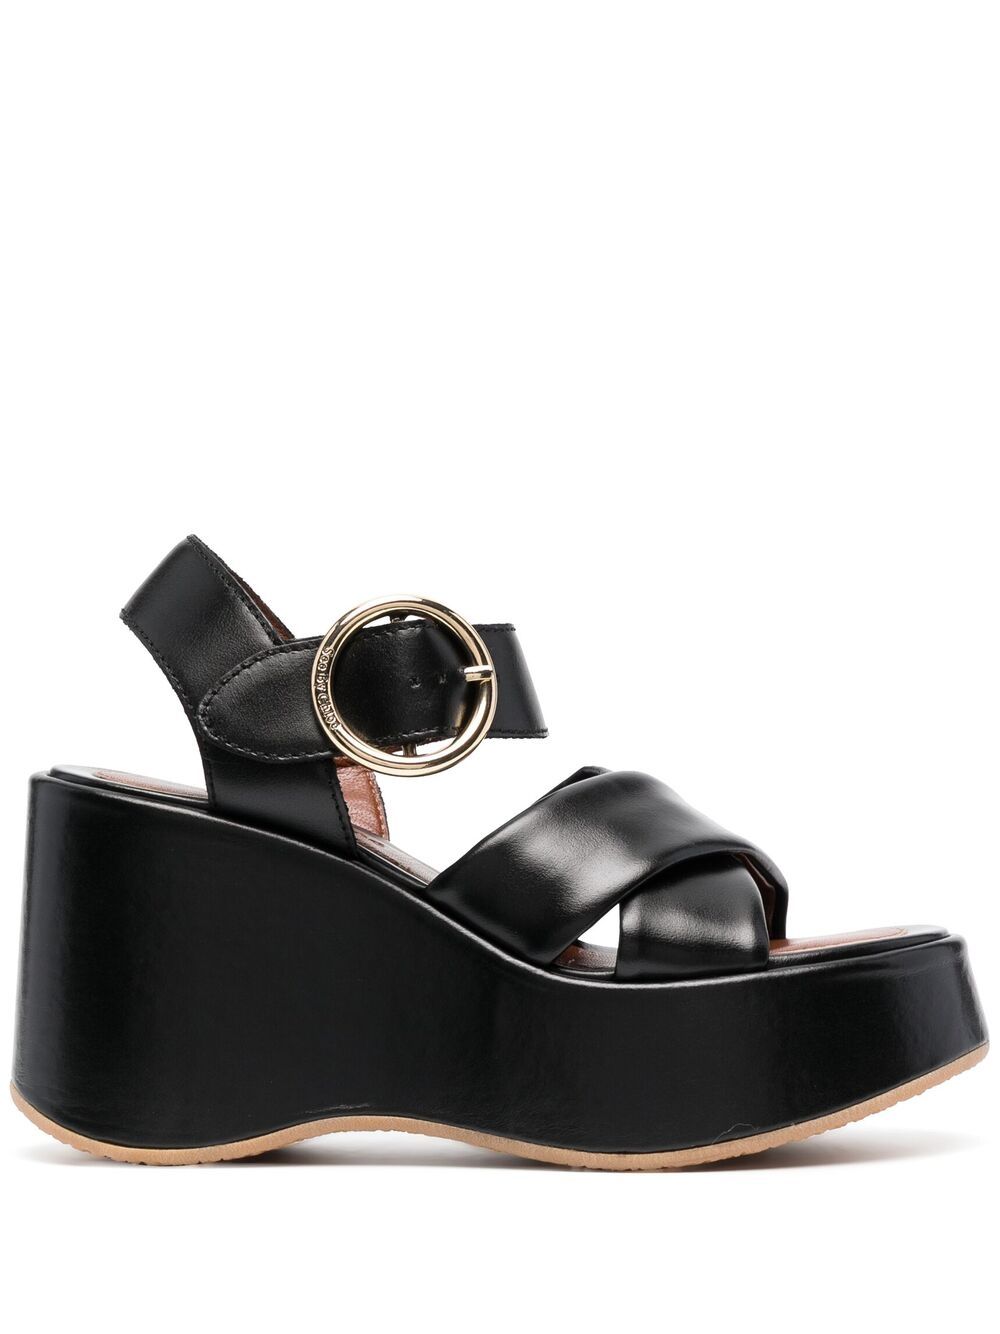 SEE BY CHLOÉ LYNA WEDGE SANDALS